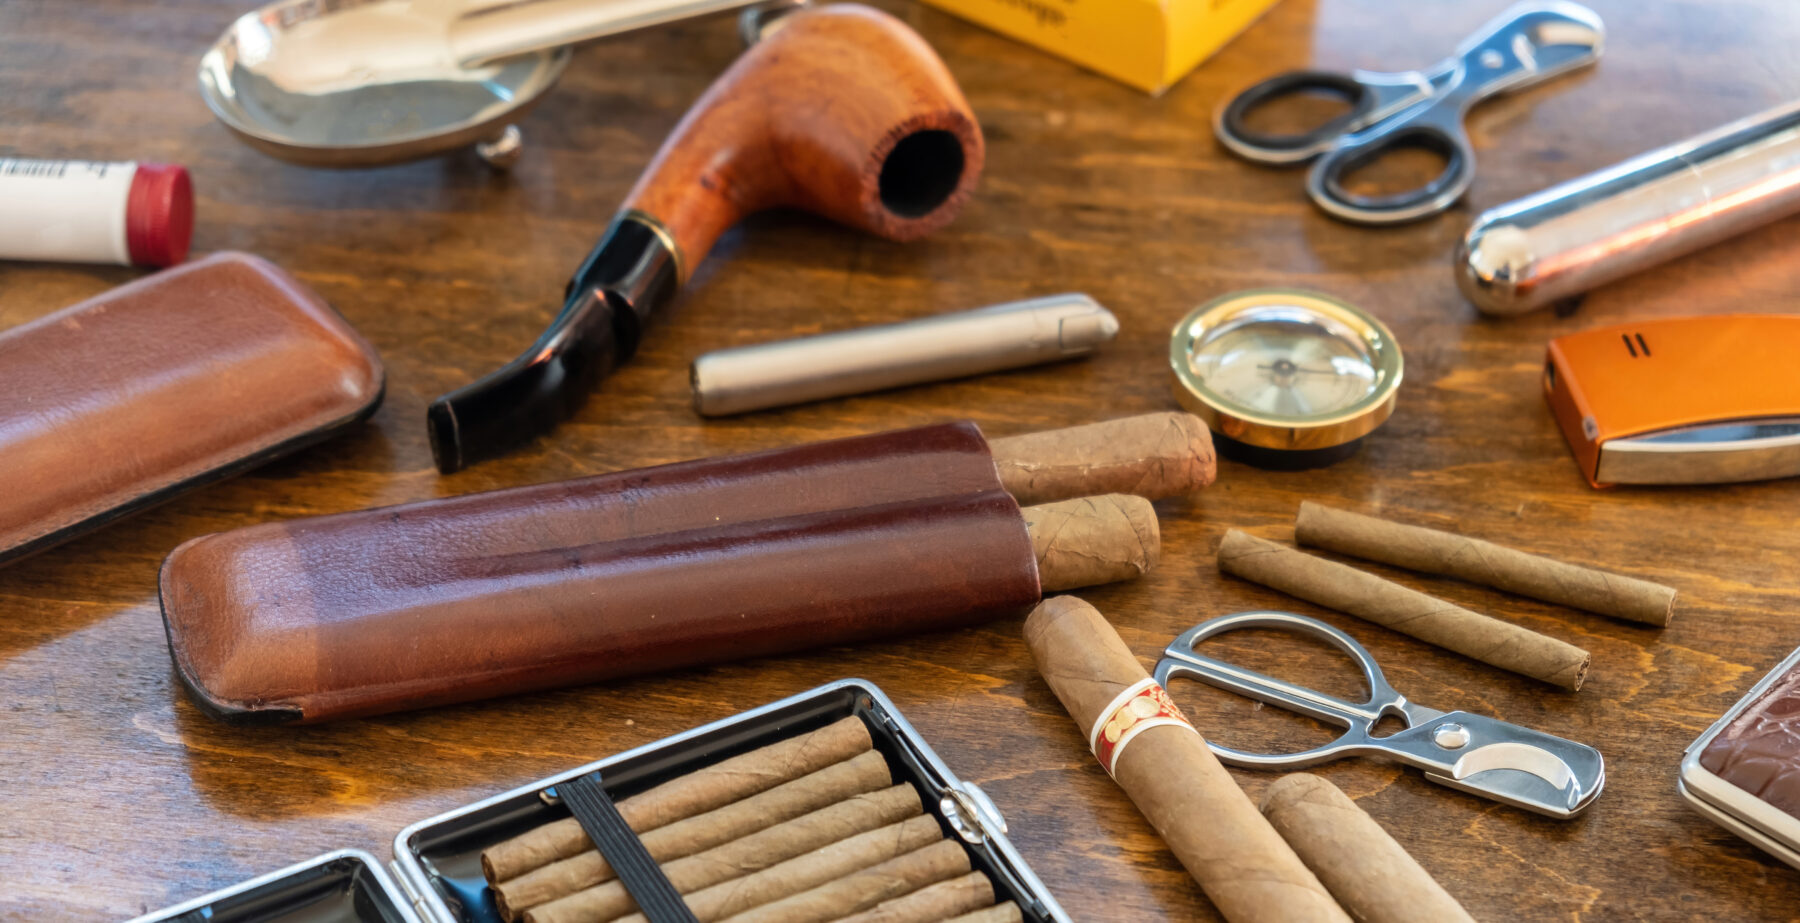 Several types of non-cigarette tobacco, including cigars, cigarillos and a pipe